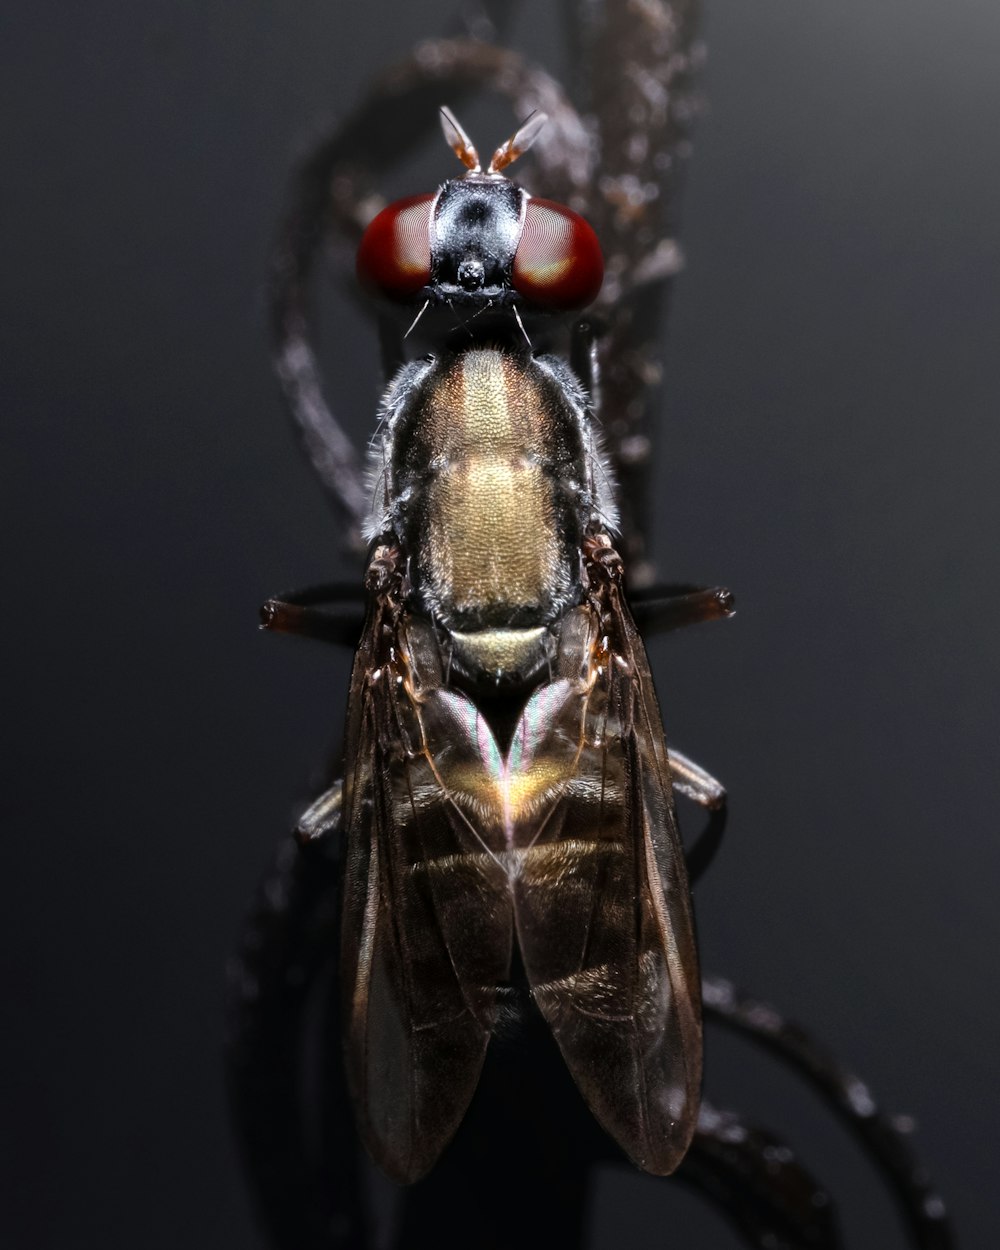 a close up of a fly on a black surface